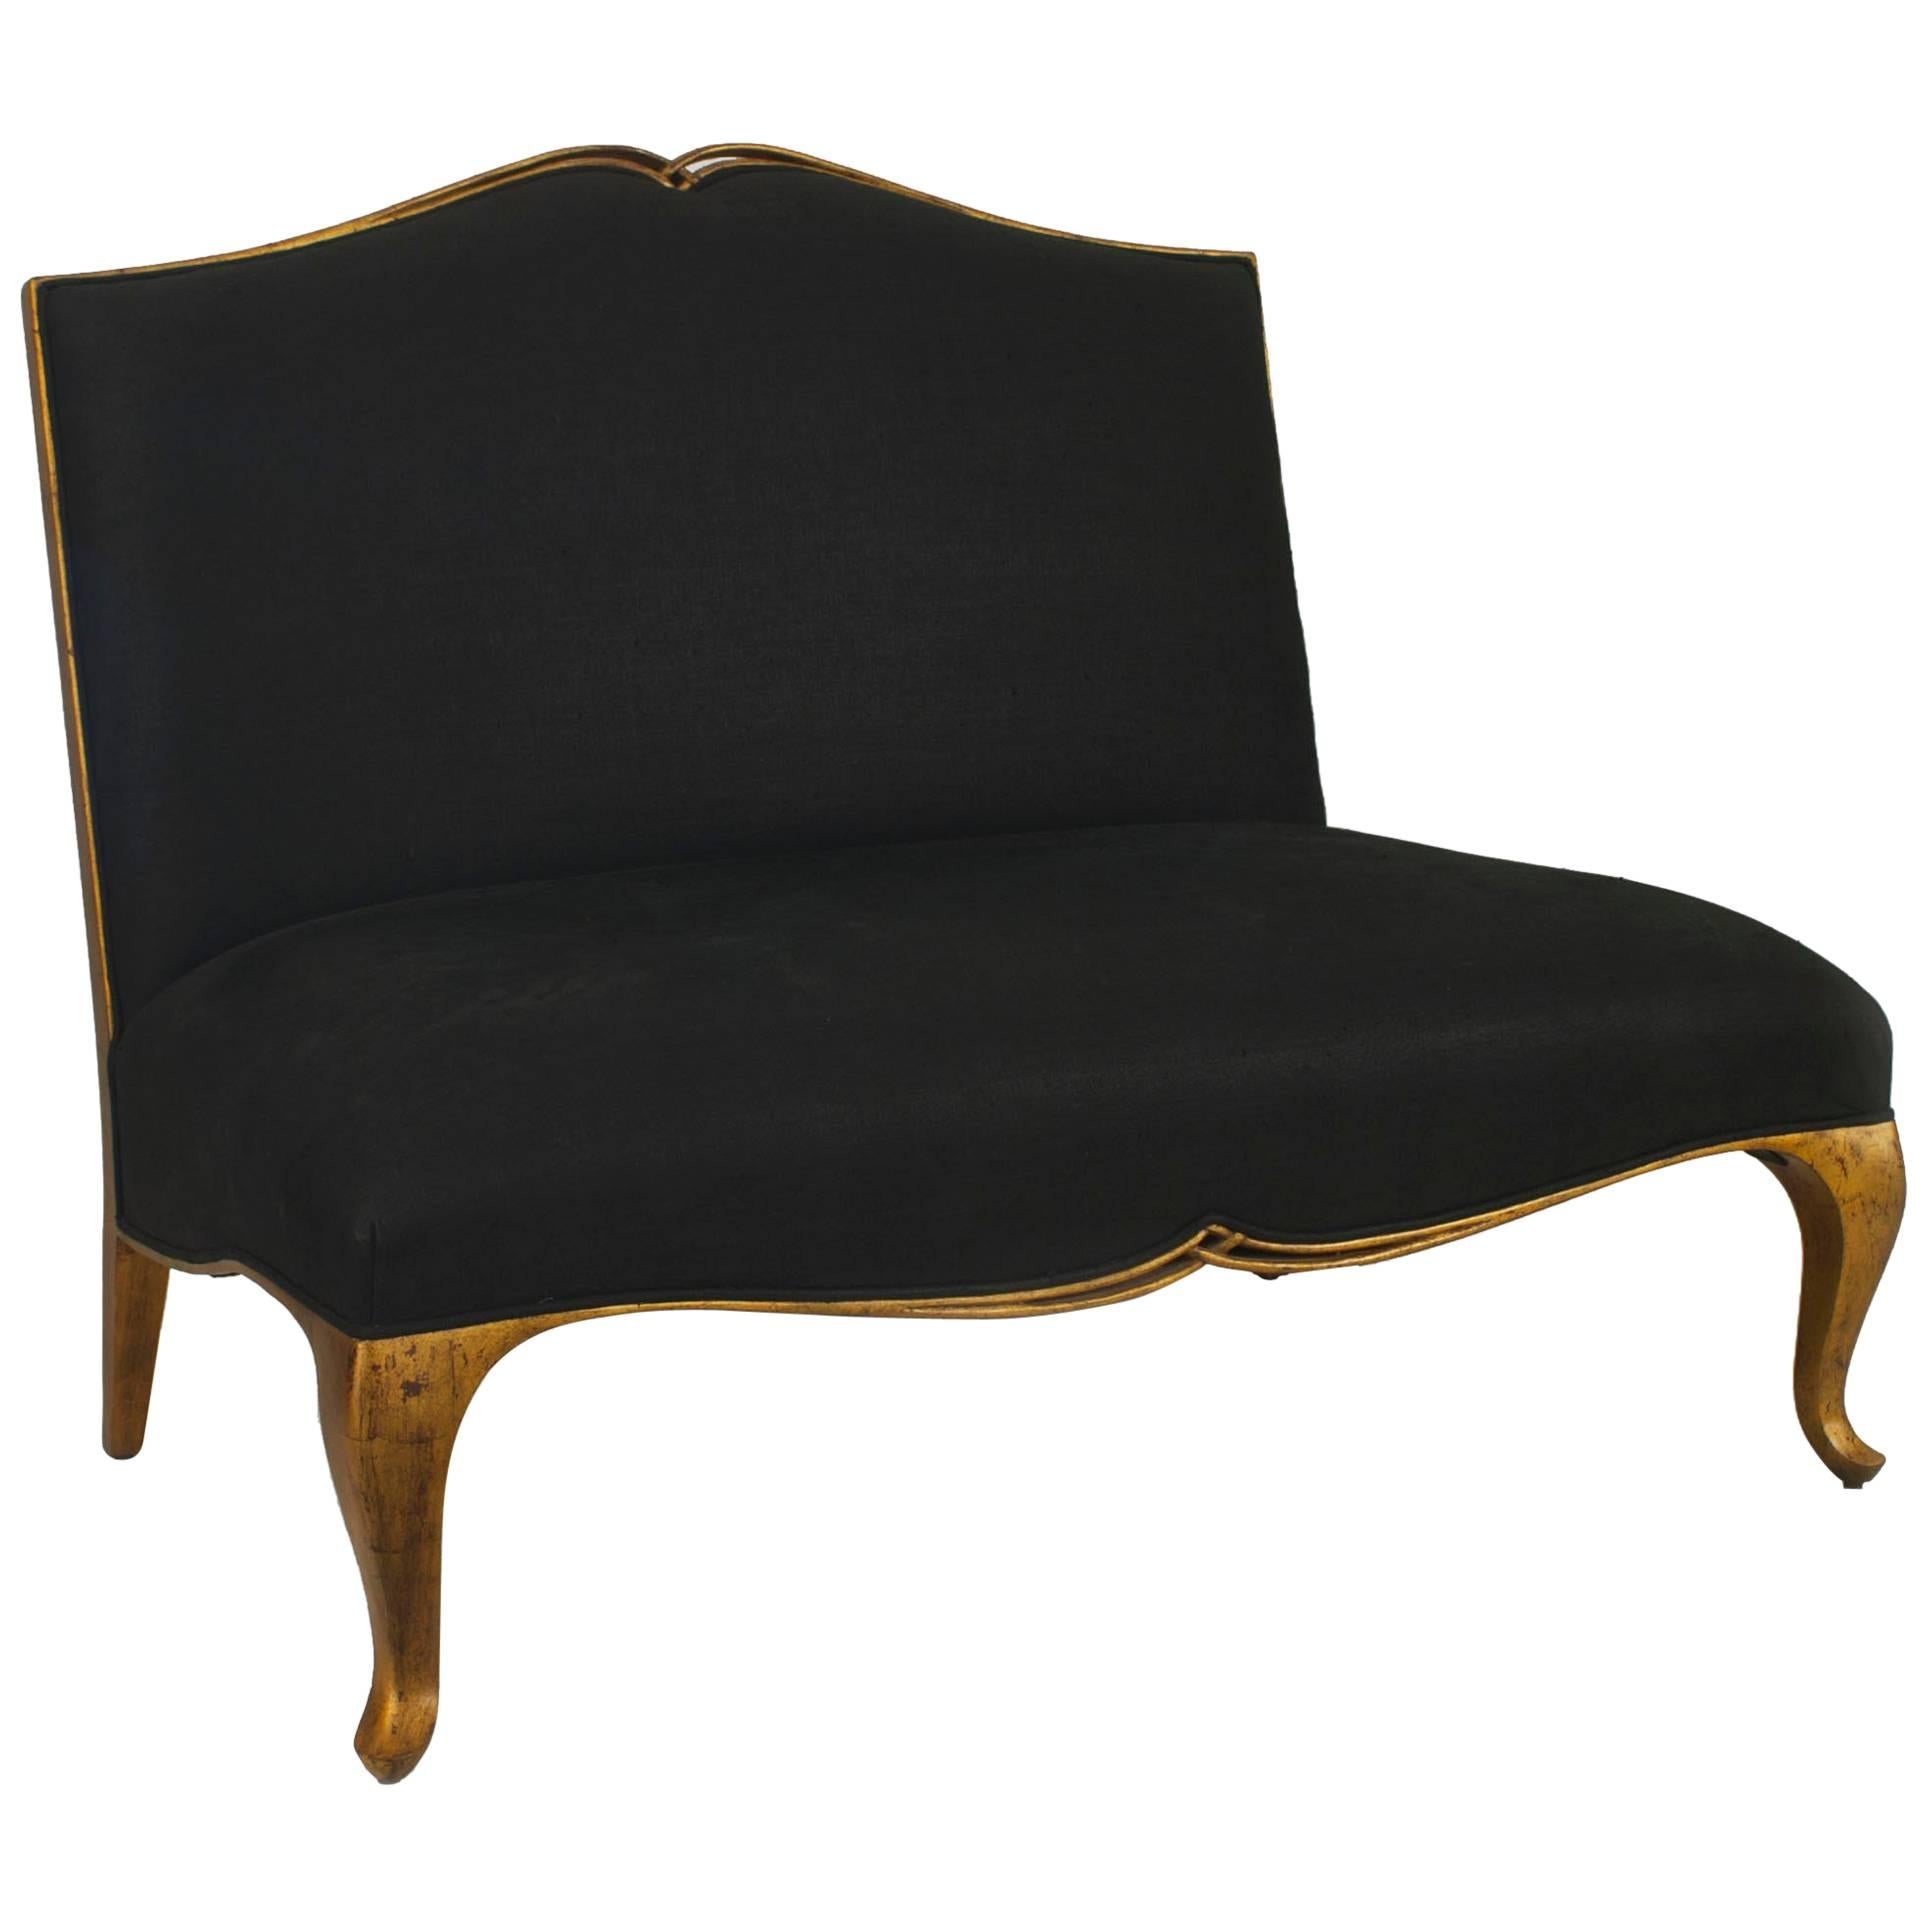 2 Contemporary Post-War Black Loveseats For Sale